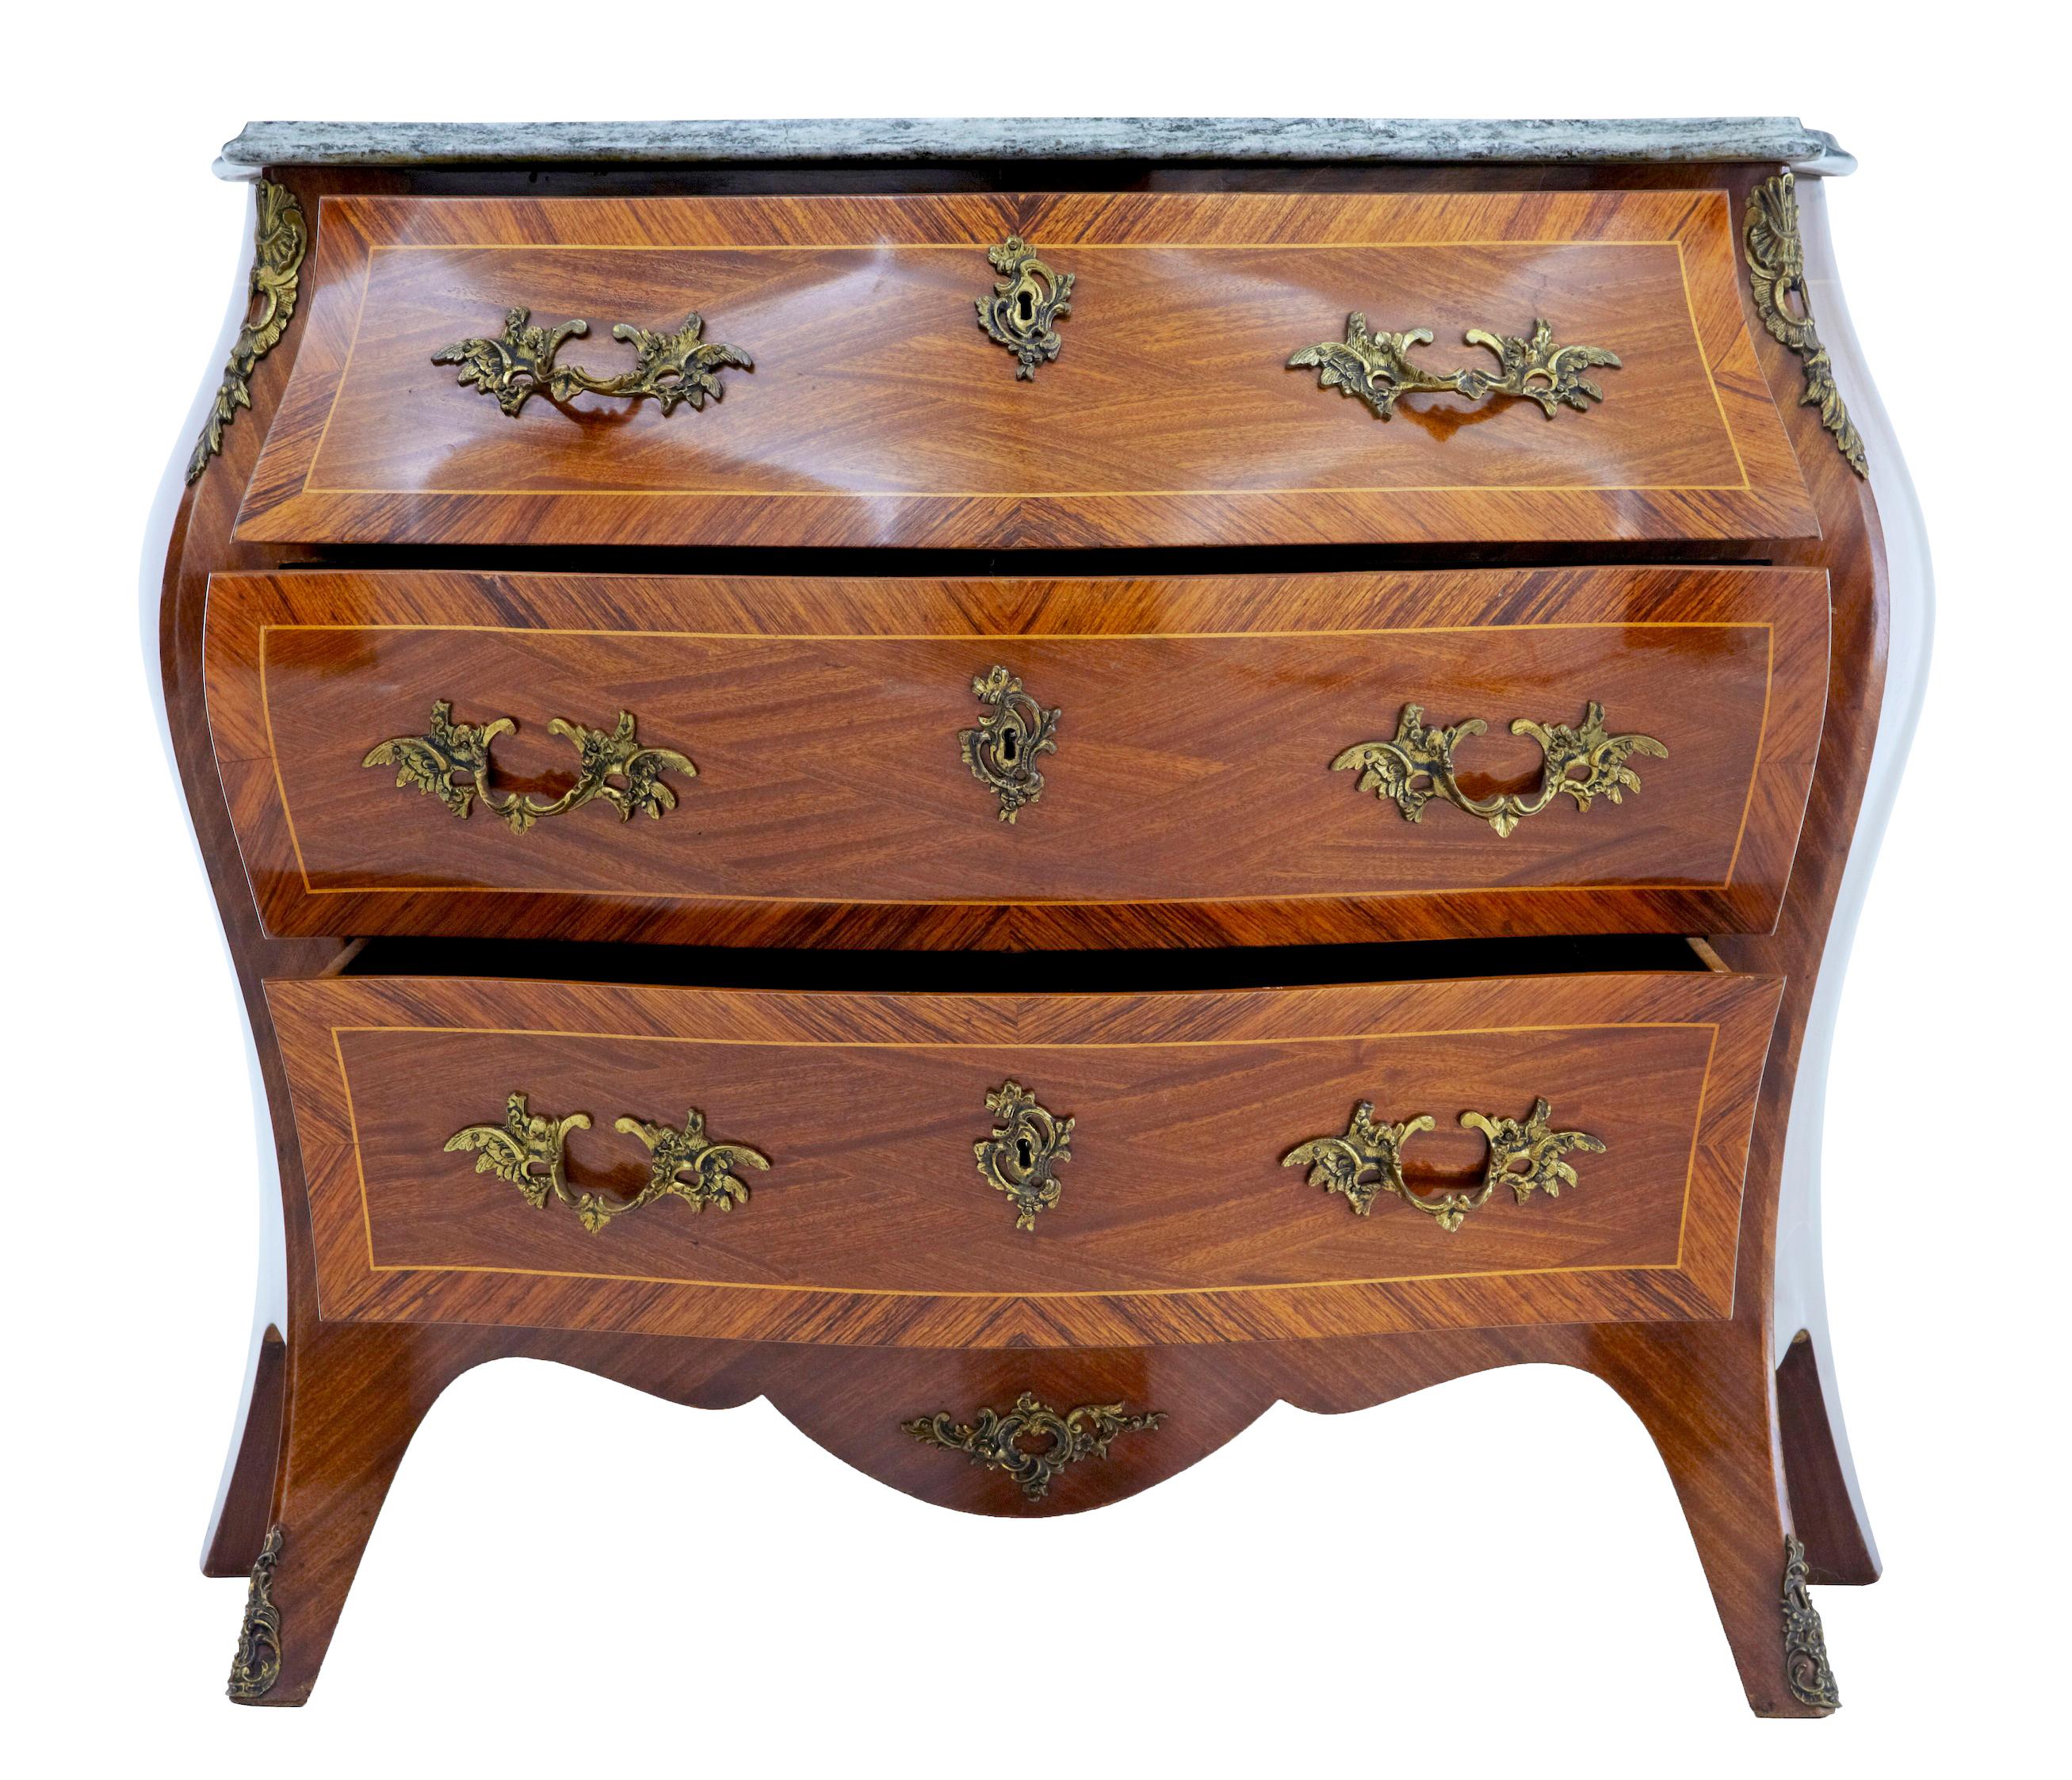 Mid-20th century kingwood and mahogany bombe commode chest of drawers, circa 1950.

Good quality rococo inspired 3-drawer commode. Bombe shaped commode. Mahogany arranged veneers, with stringing and crossbanded in kingwood. Fitted with ornate